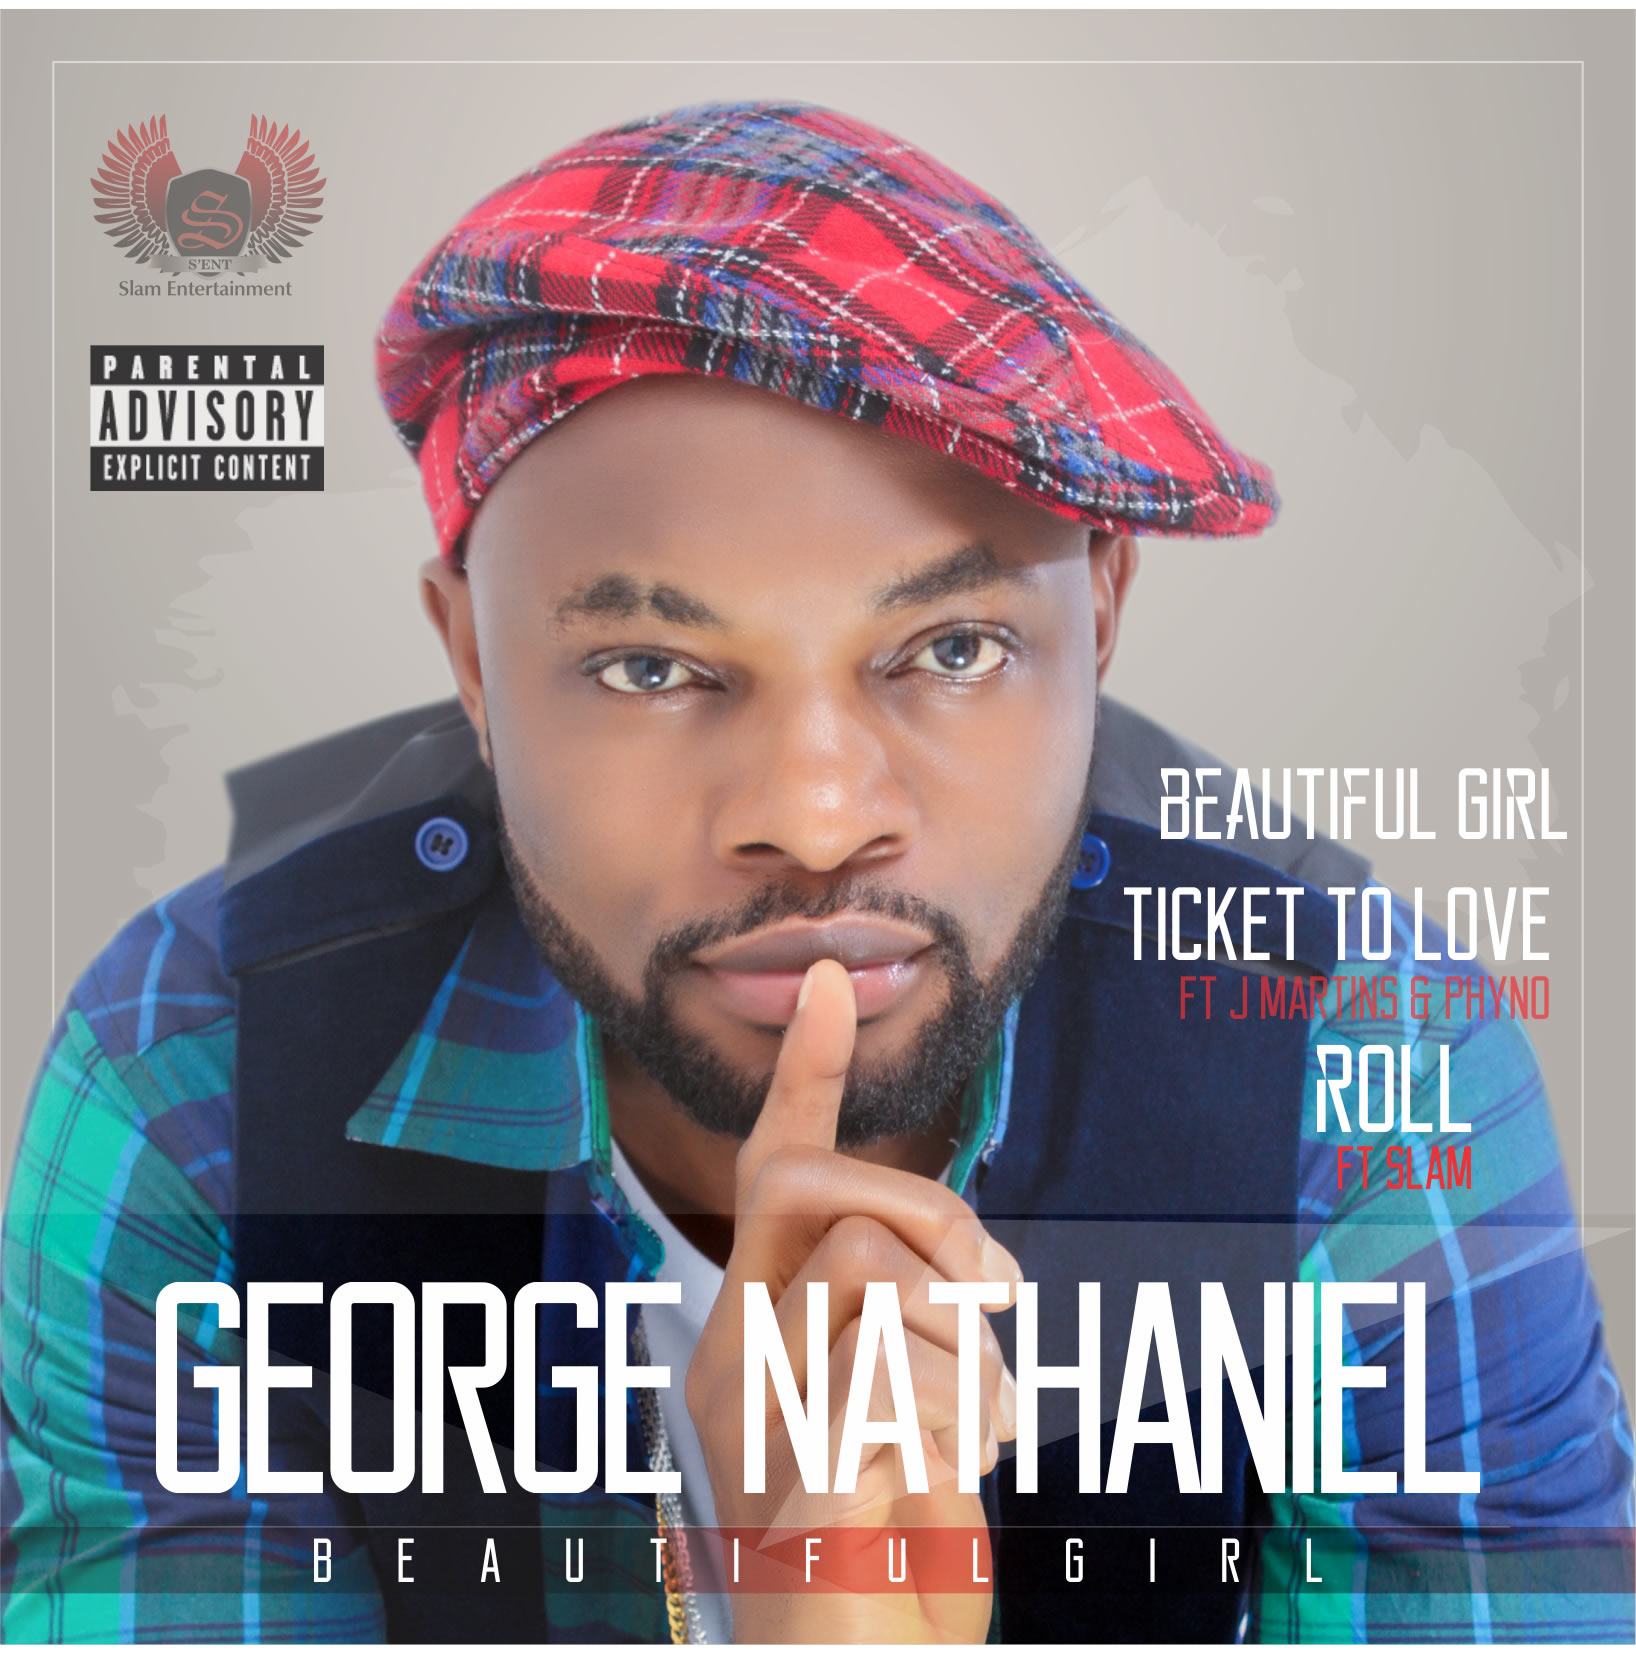 George Nathaniel - Ticket to Love ft J Martins & Phyno + Beautiful Girl [AuDio]